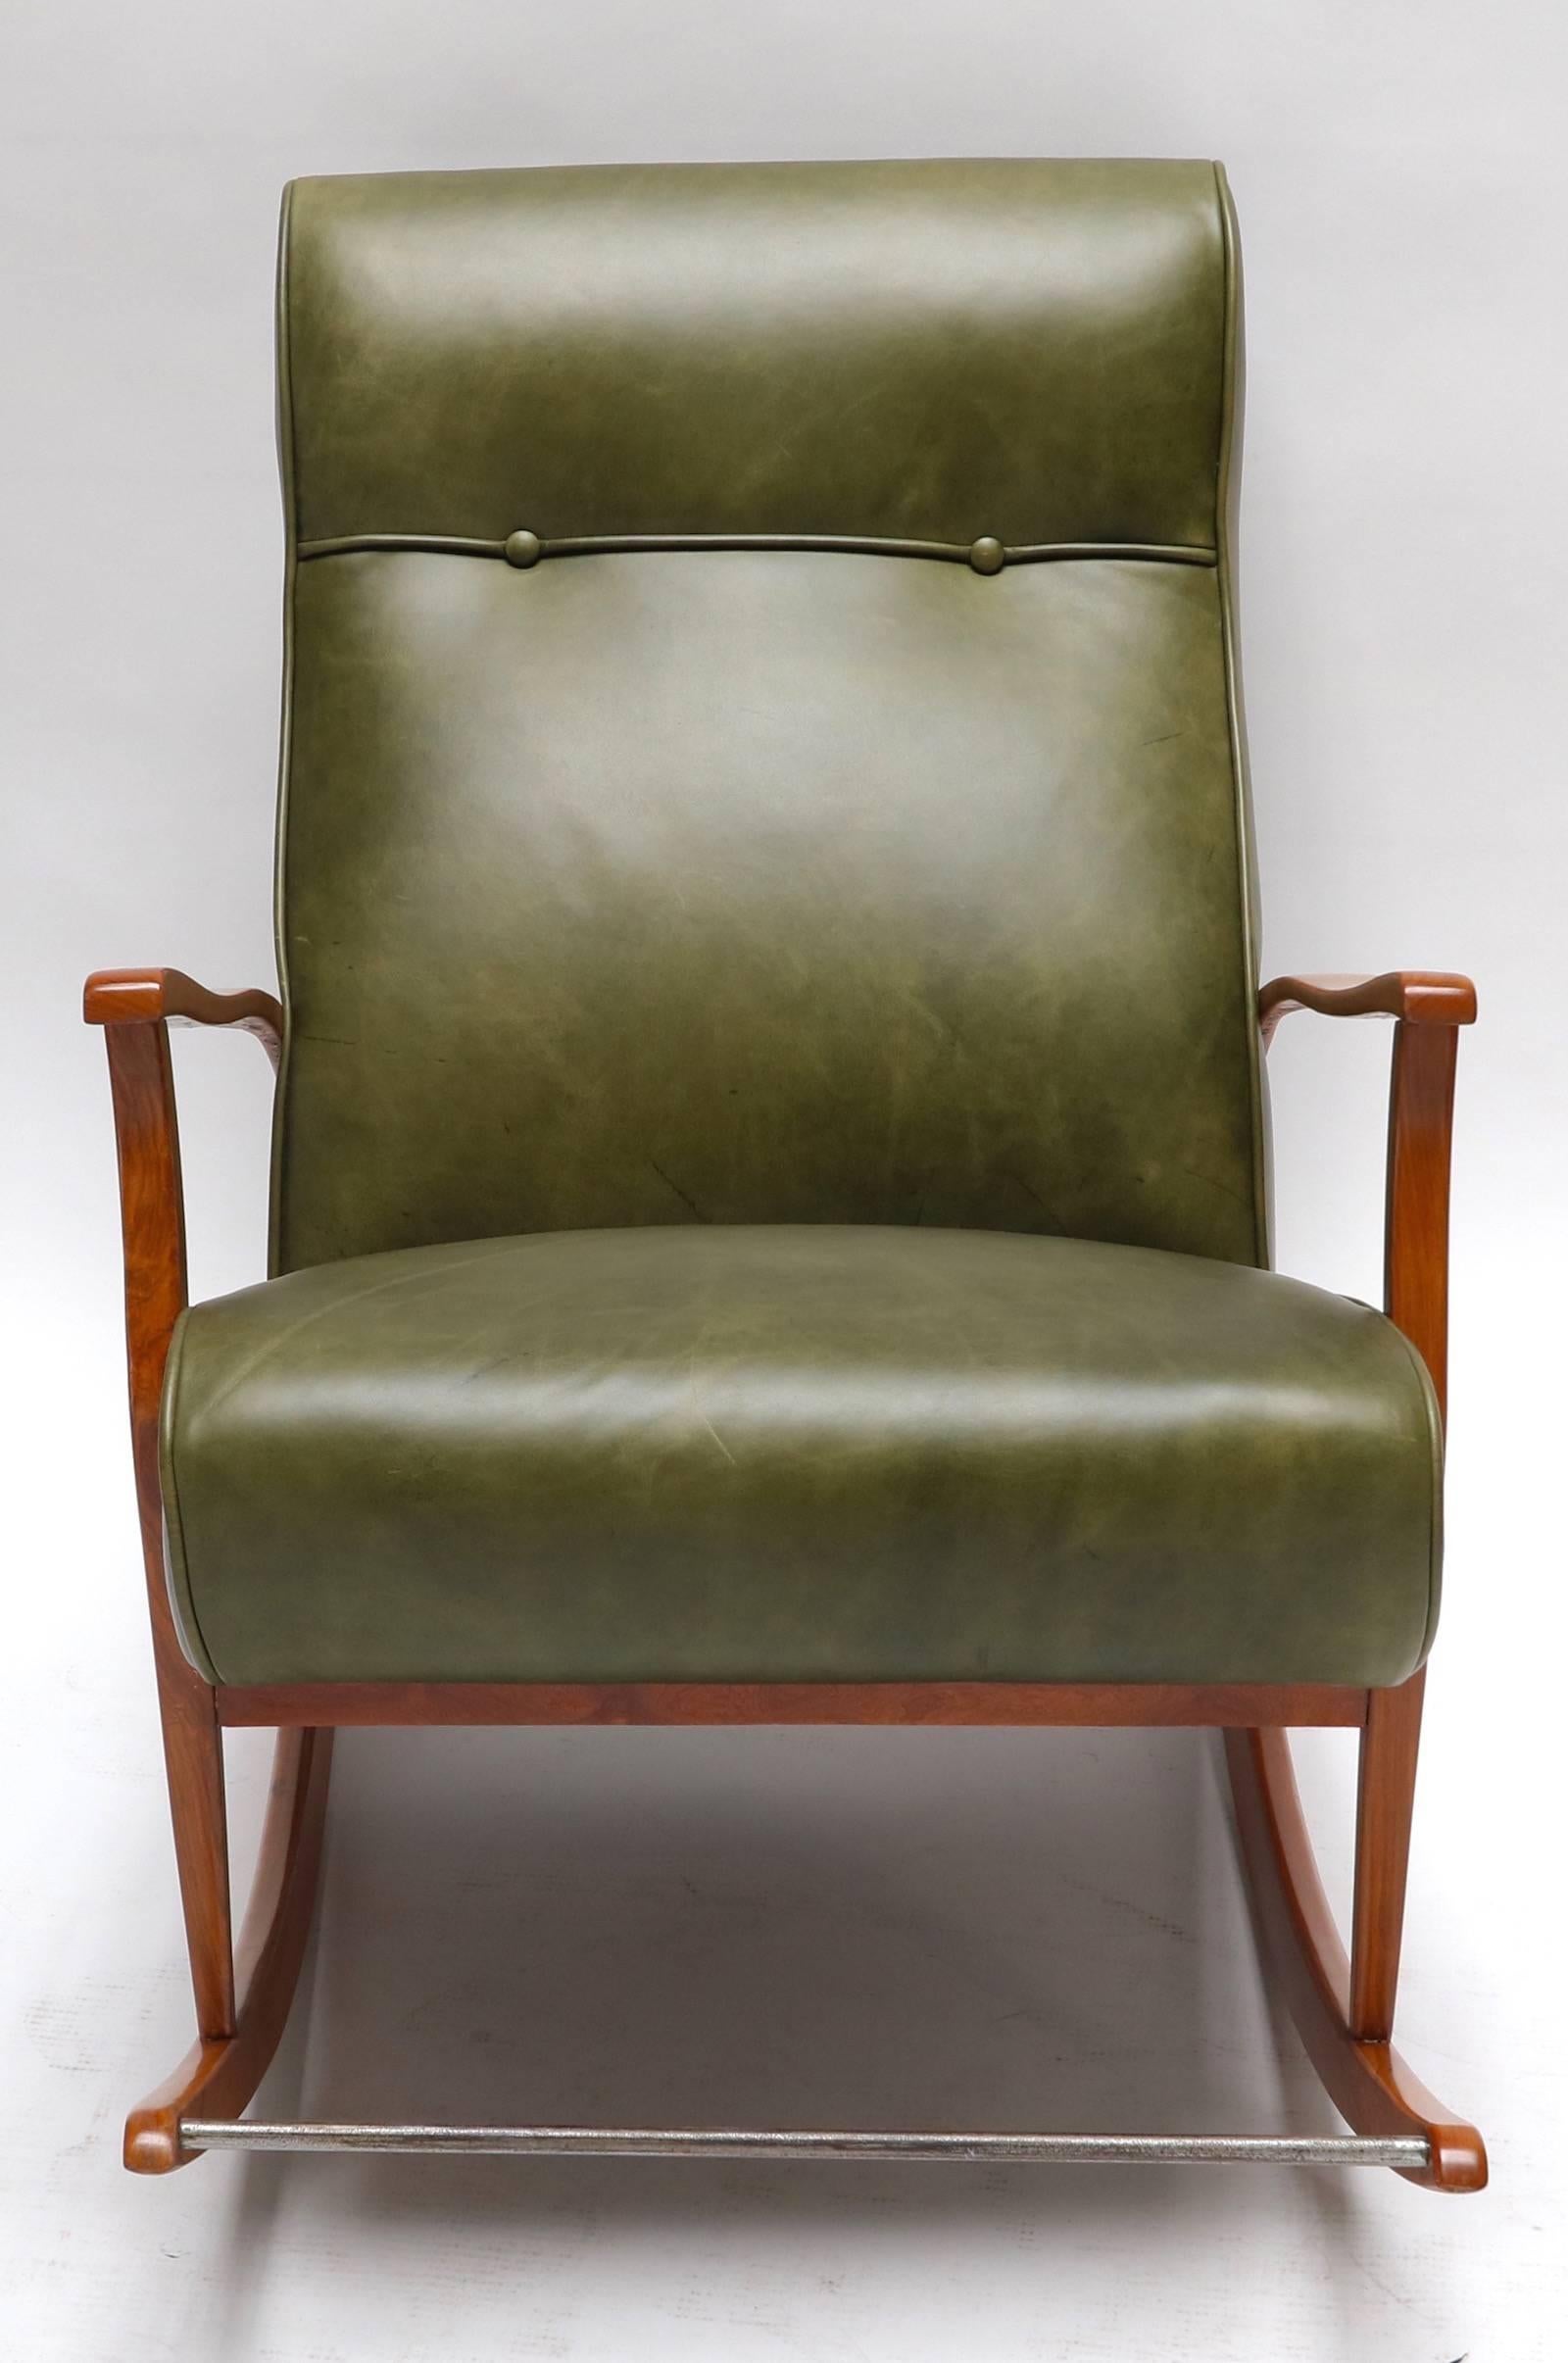 Mid-Century Modern Brazilian Wooden Rocking Chair in Green Leather, 1960s For Sale